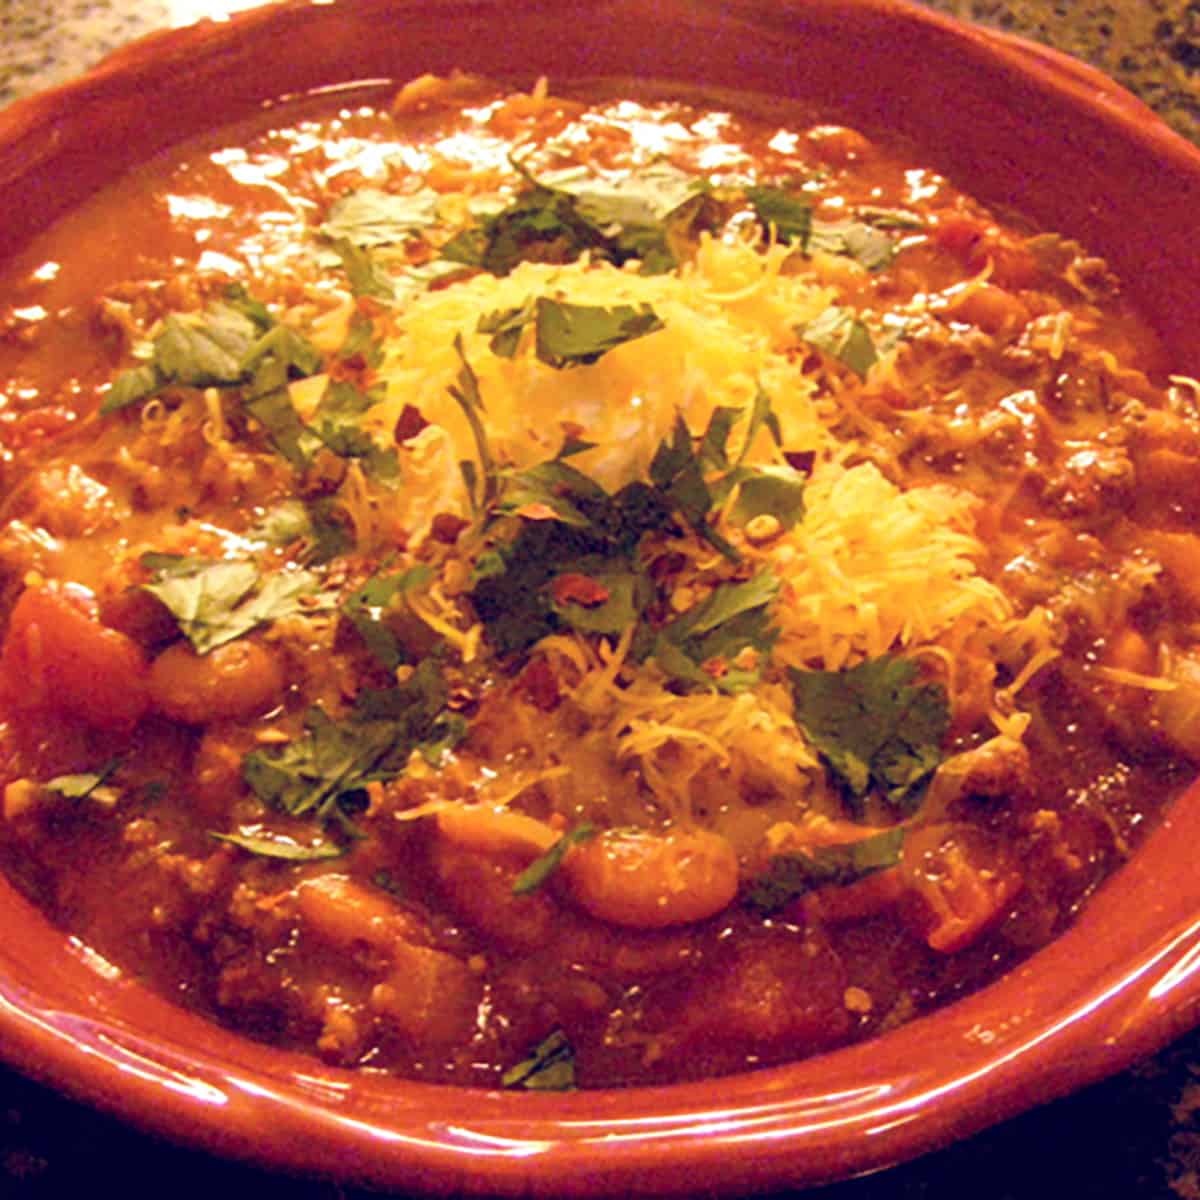 A serving of chili topped with shredded cheese in a red bowl.